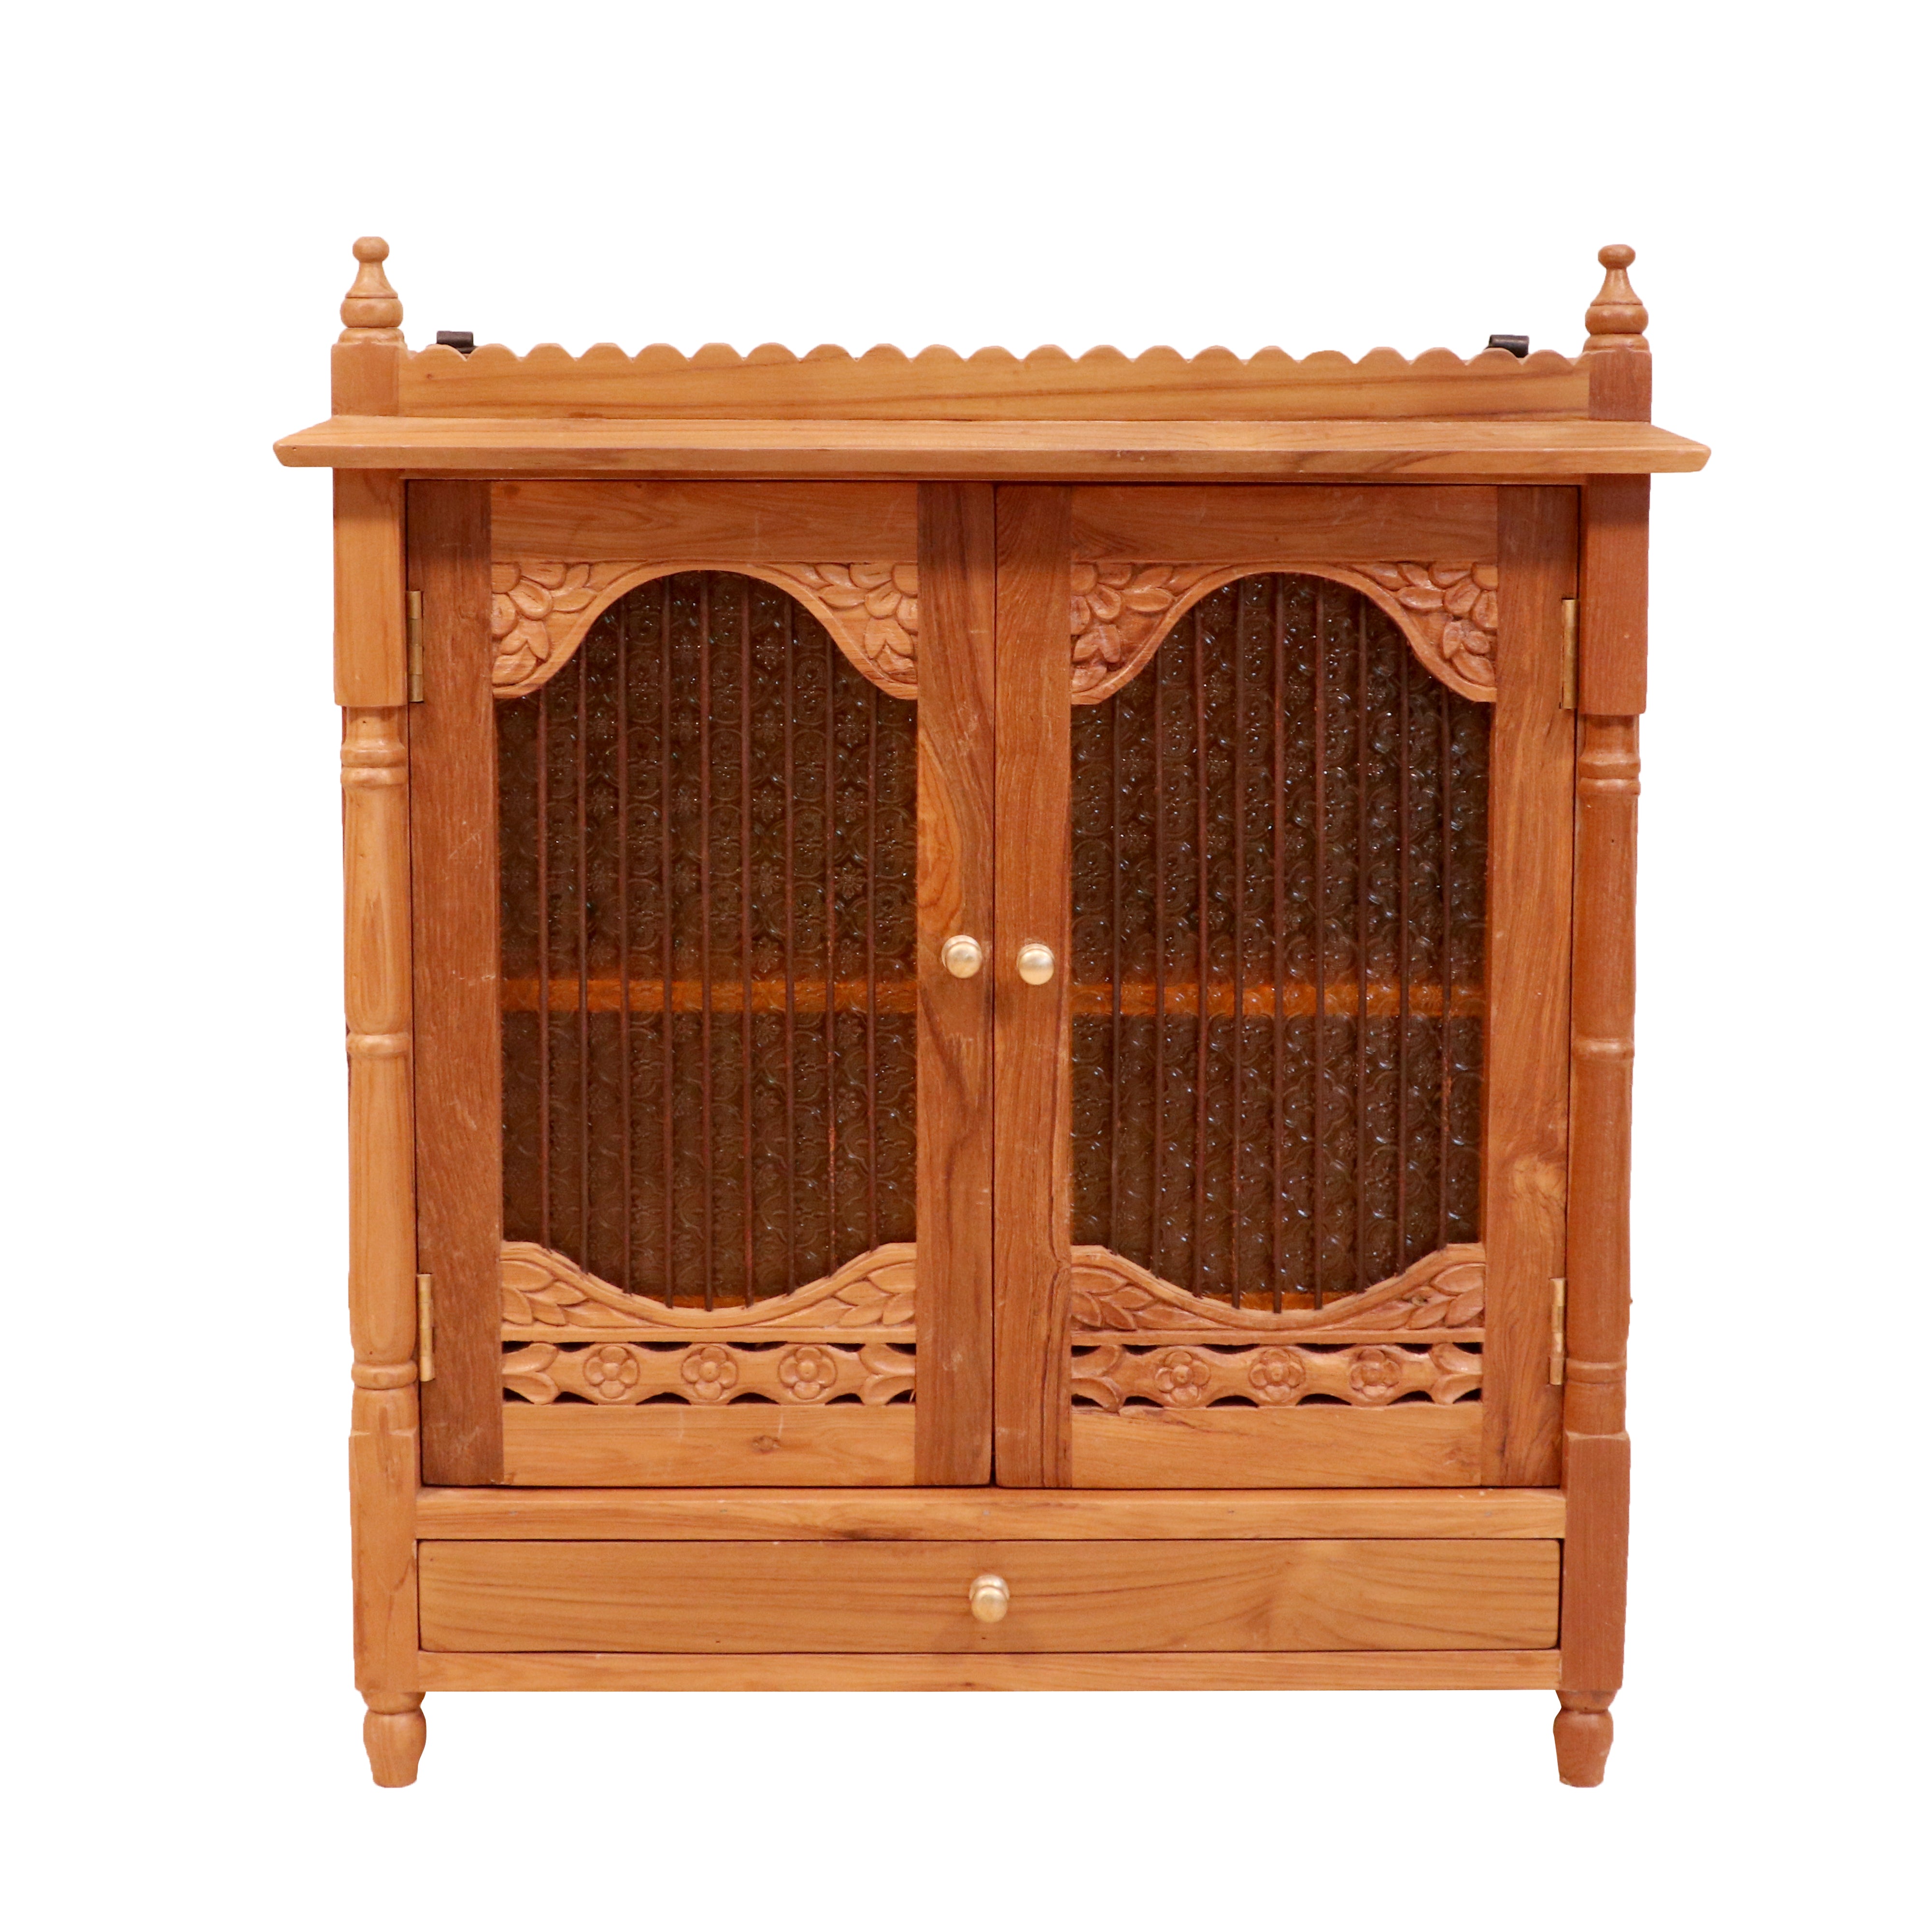 Classic Chronic Carved Handmade Wooden Temple with Single Drawer Temple